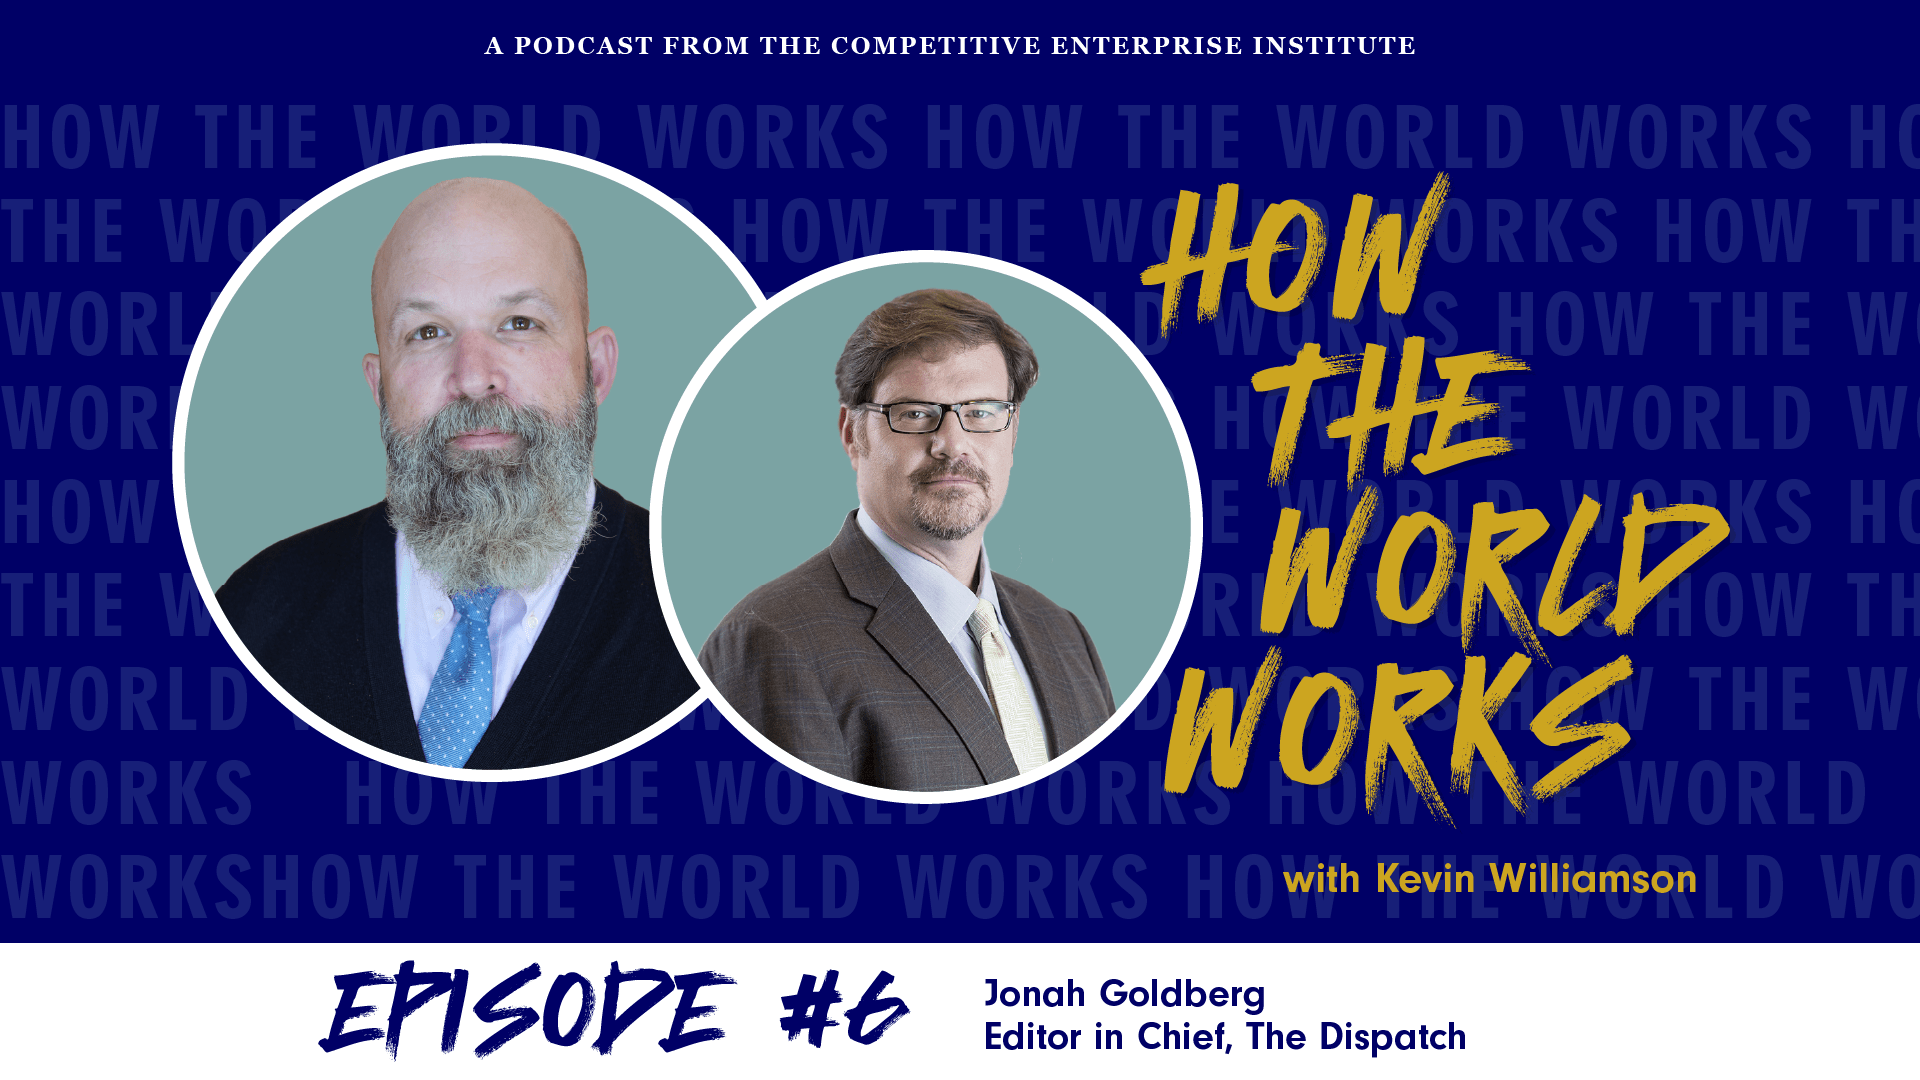 How the World Works Podcast with Guest Jonah Goldberg